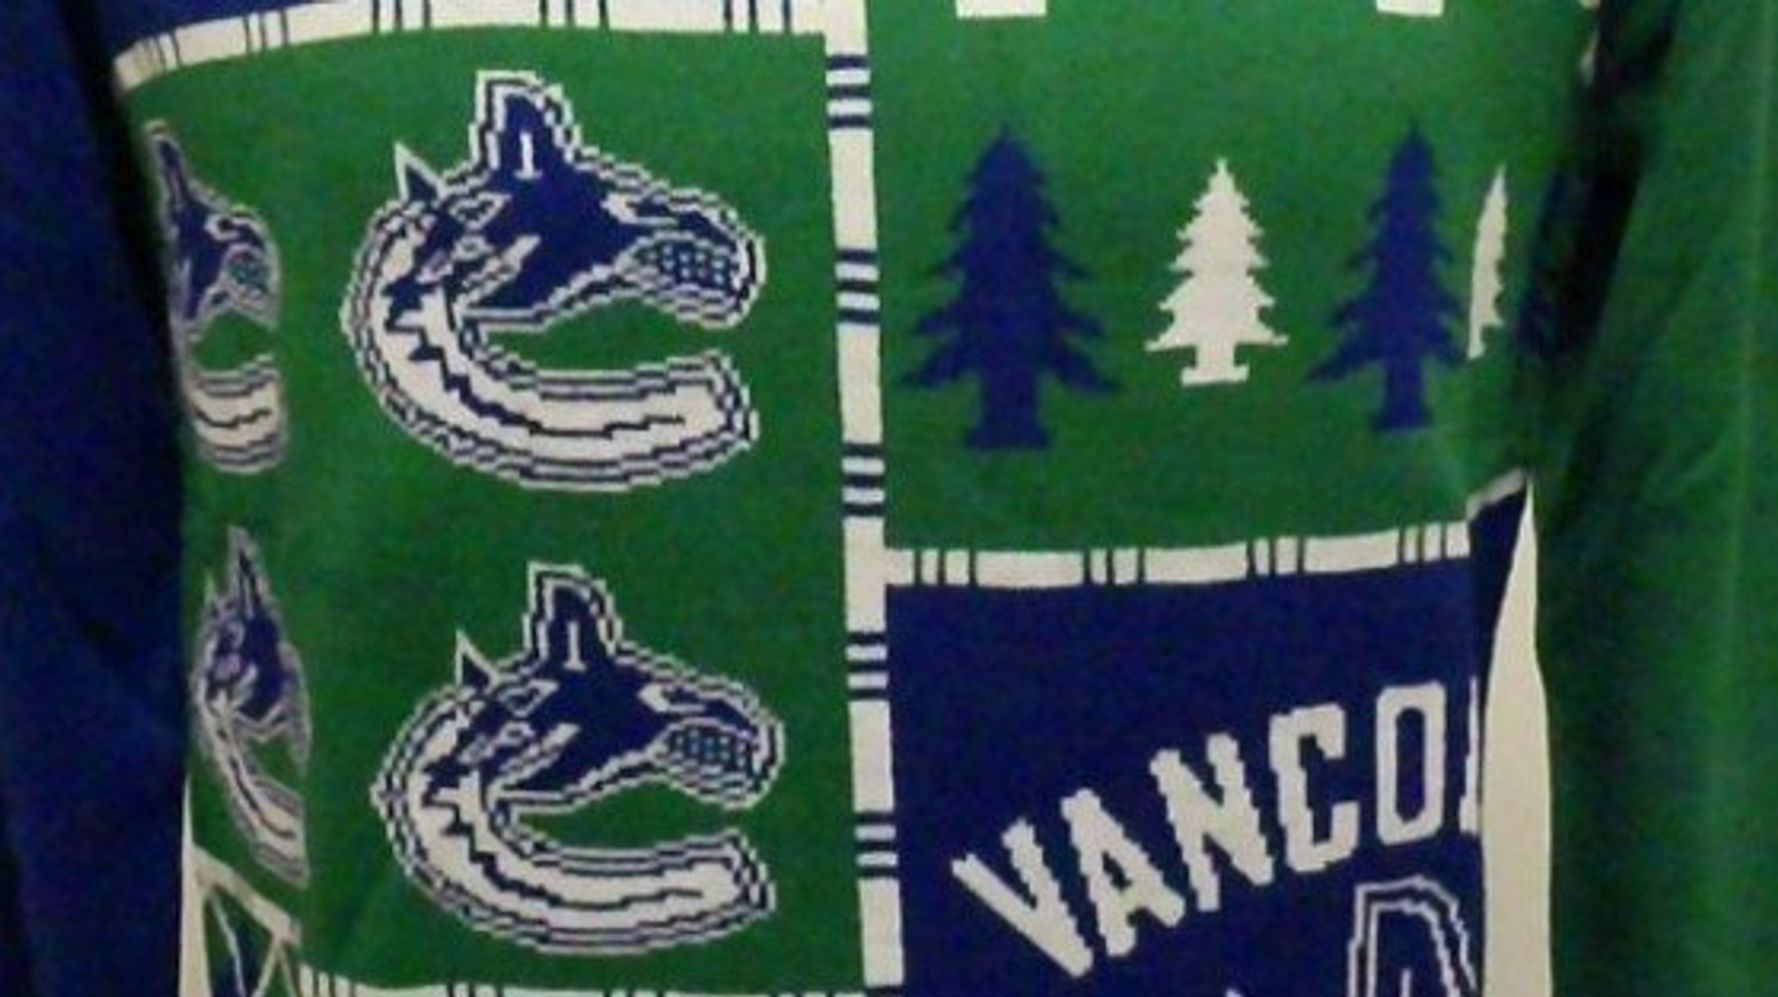 Vintage Canucks Sweater Astonishing Grinch Max Vancouver Canucks Gift -  Personalized Gifts: Family, Sports, Occasions, Trending